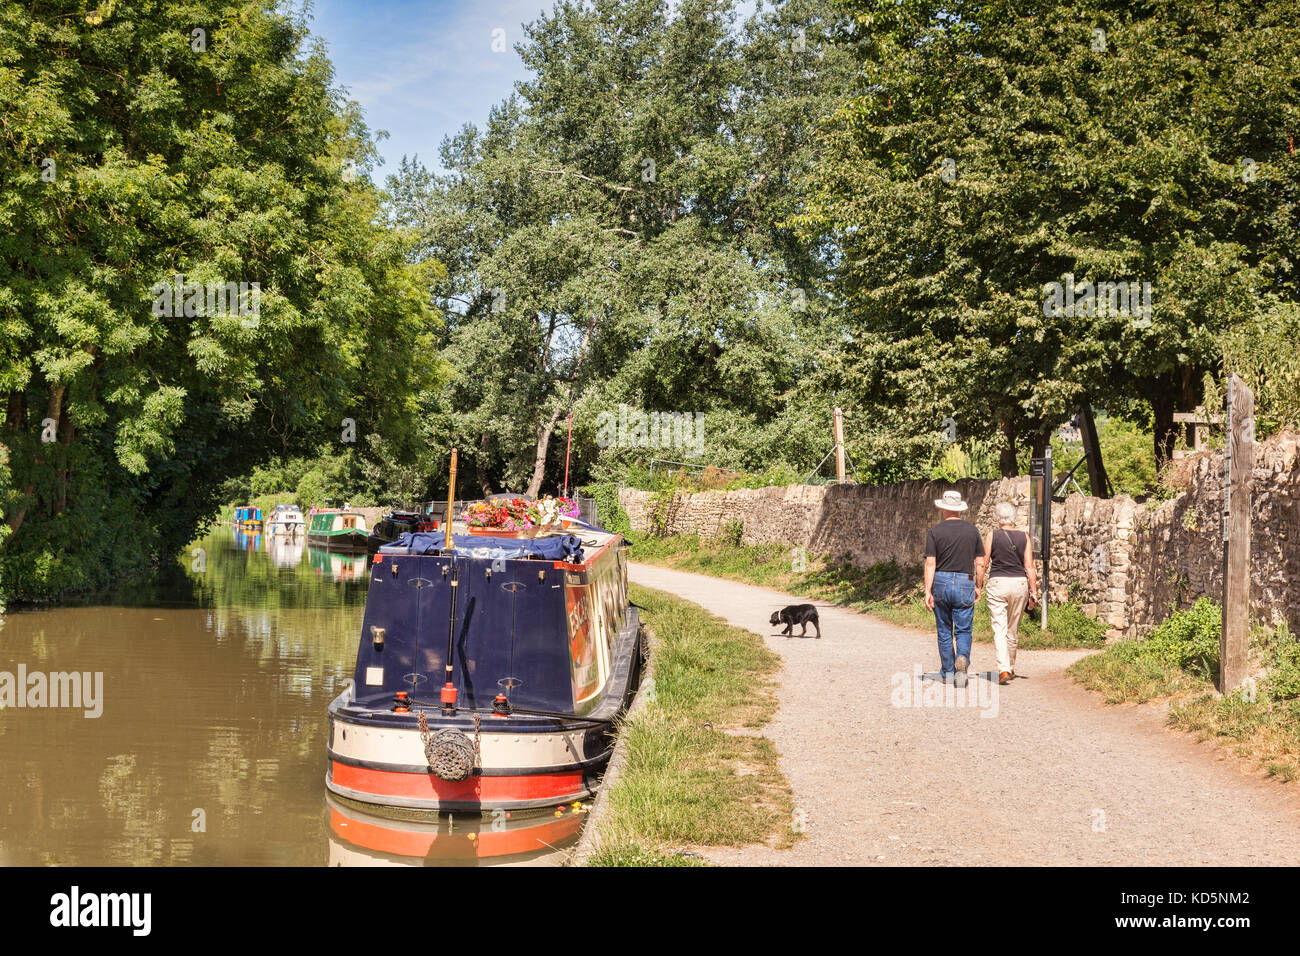 7 July 2017: Bradford on Avon, Somerset, England, UK - Couple with dog walking on the tow path beside a row of narrowboats moored along the banks of t Stock Photo